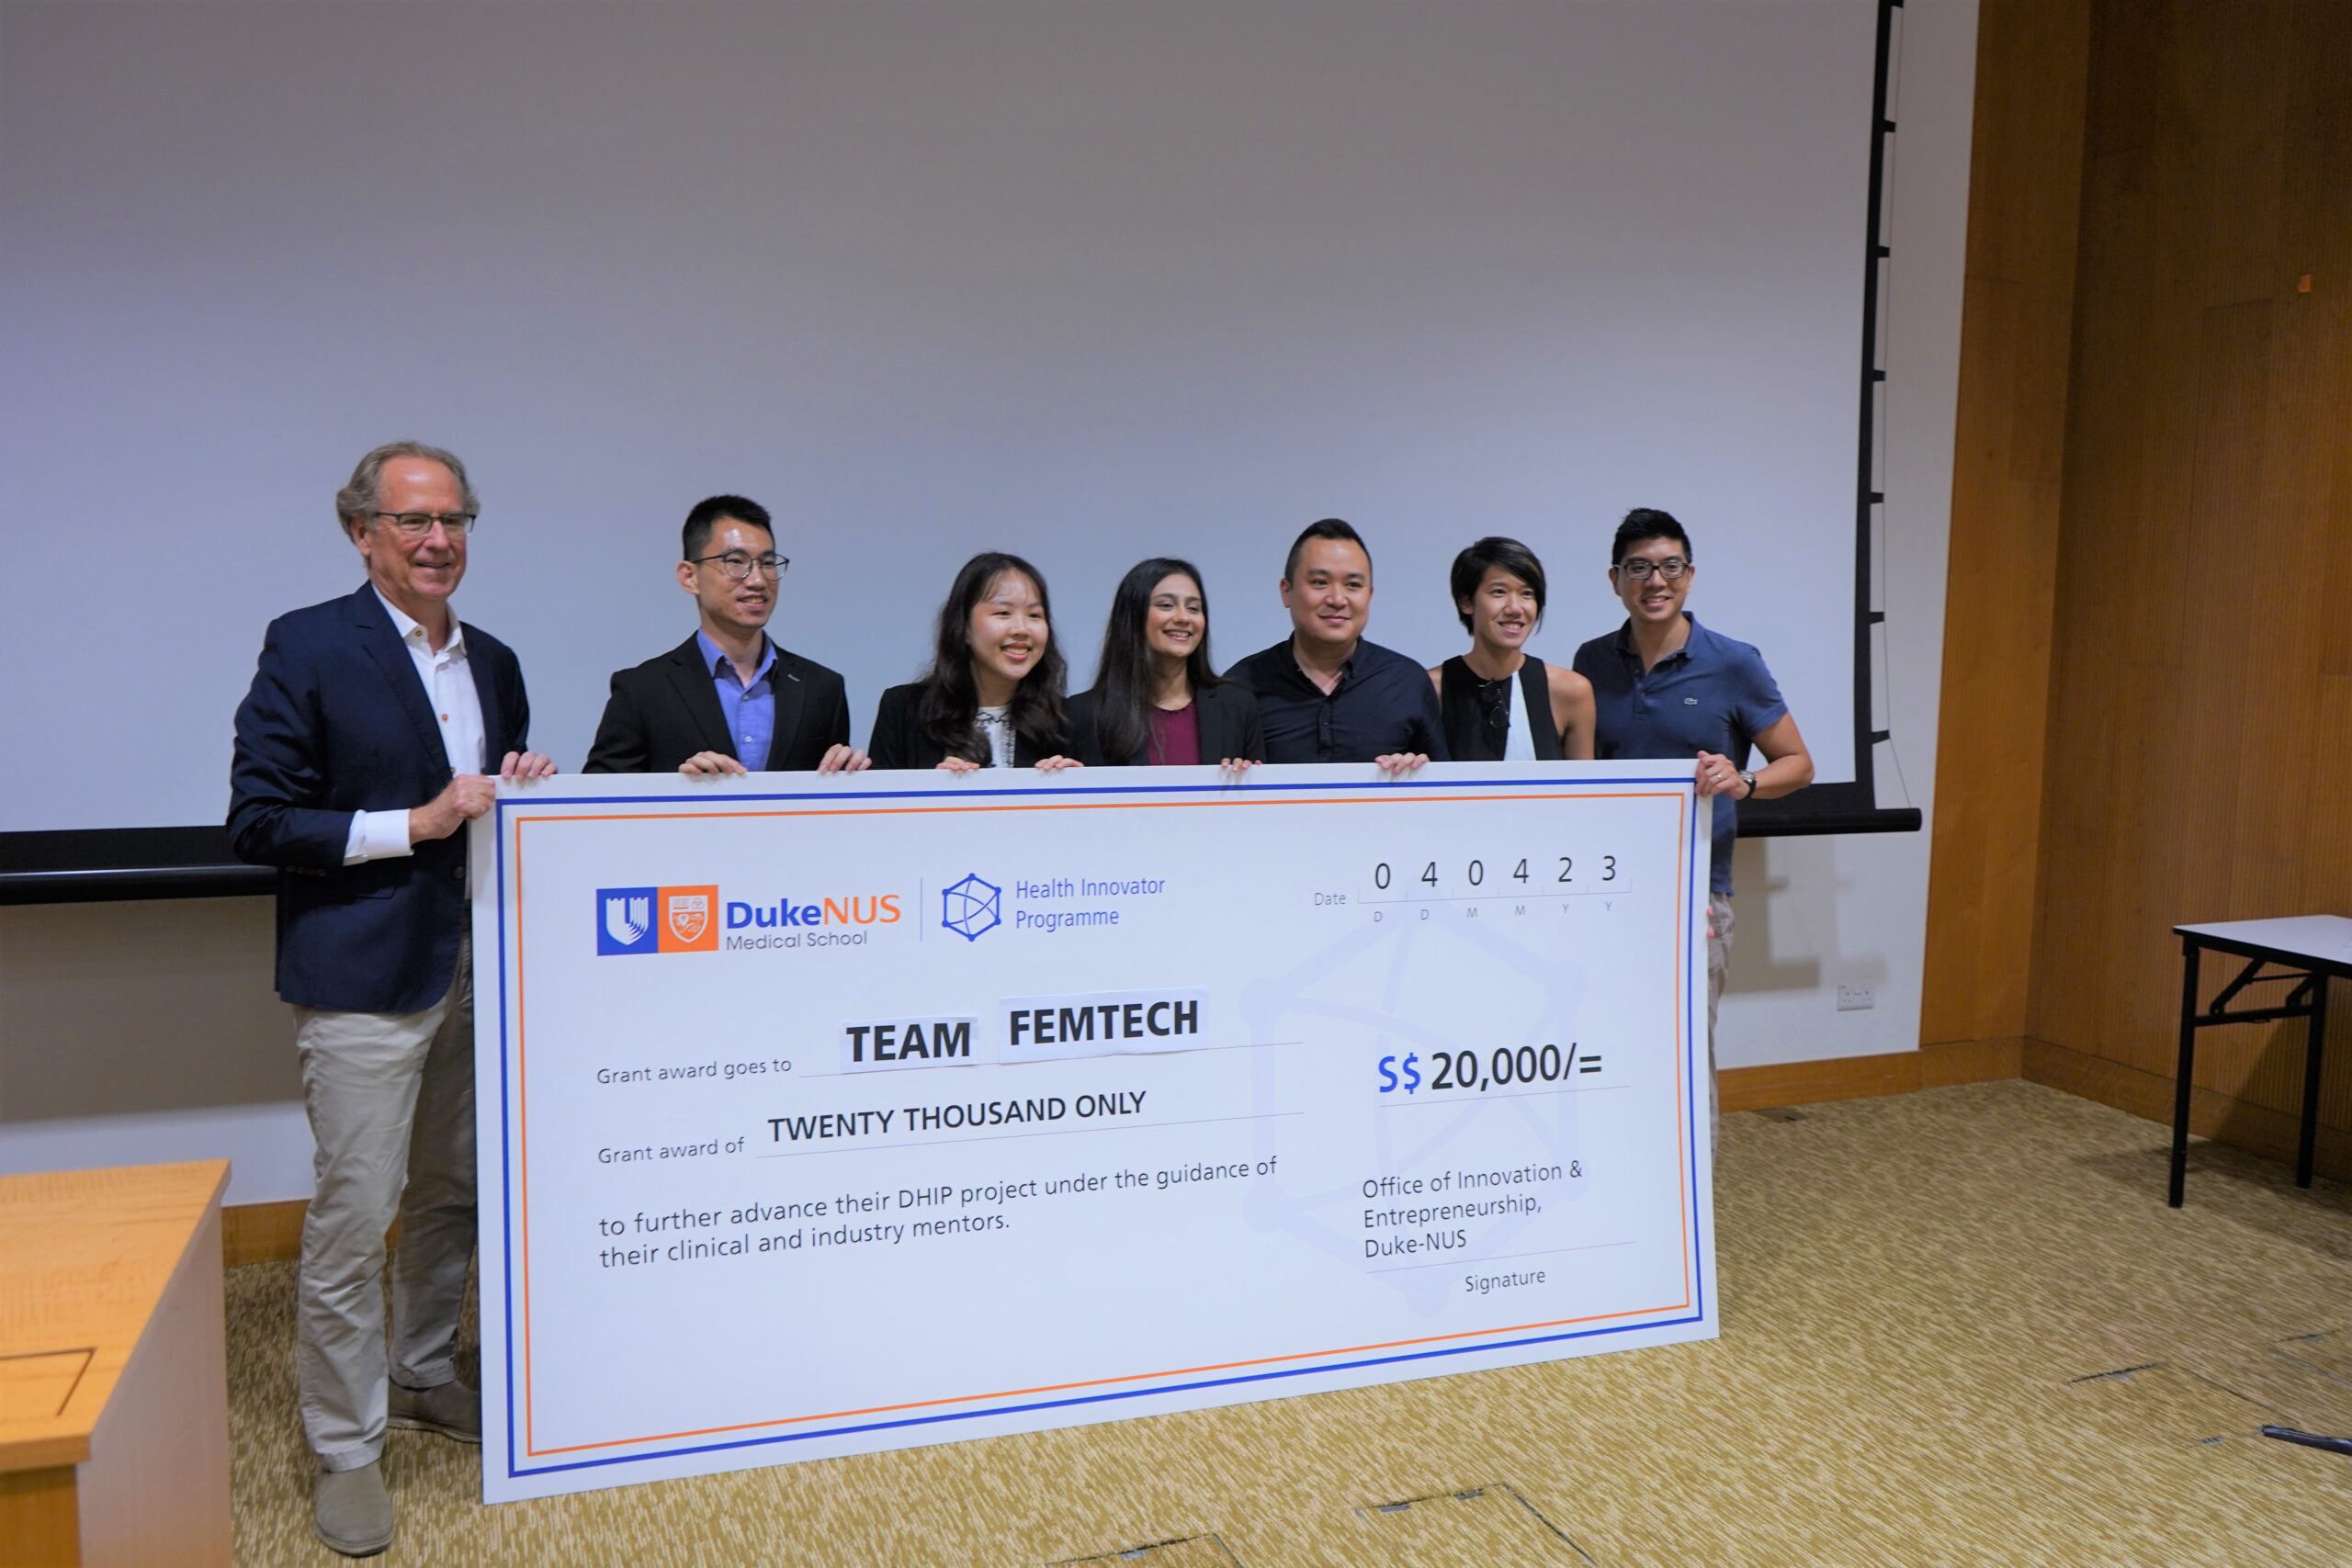 The winning team, OasiGuard, received an invention advancement funding of S$20,000.